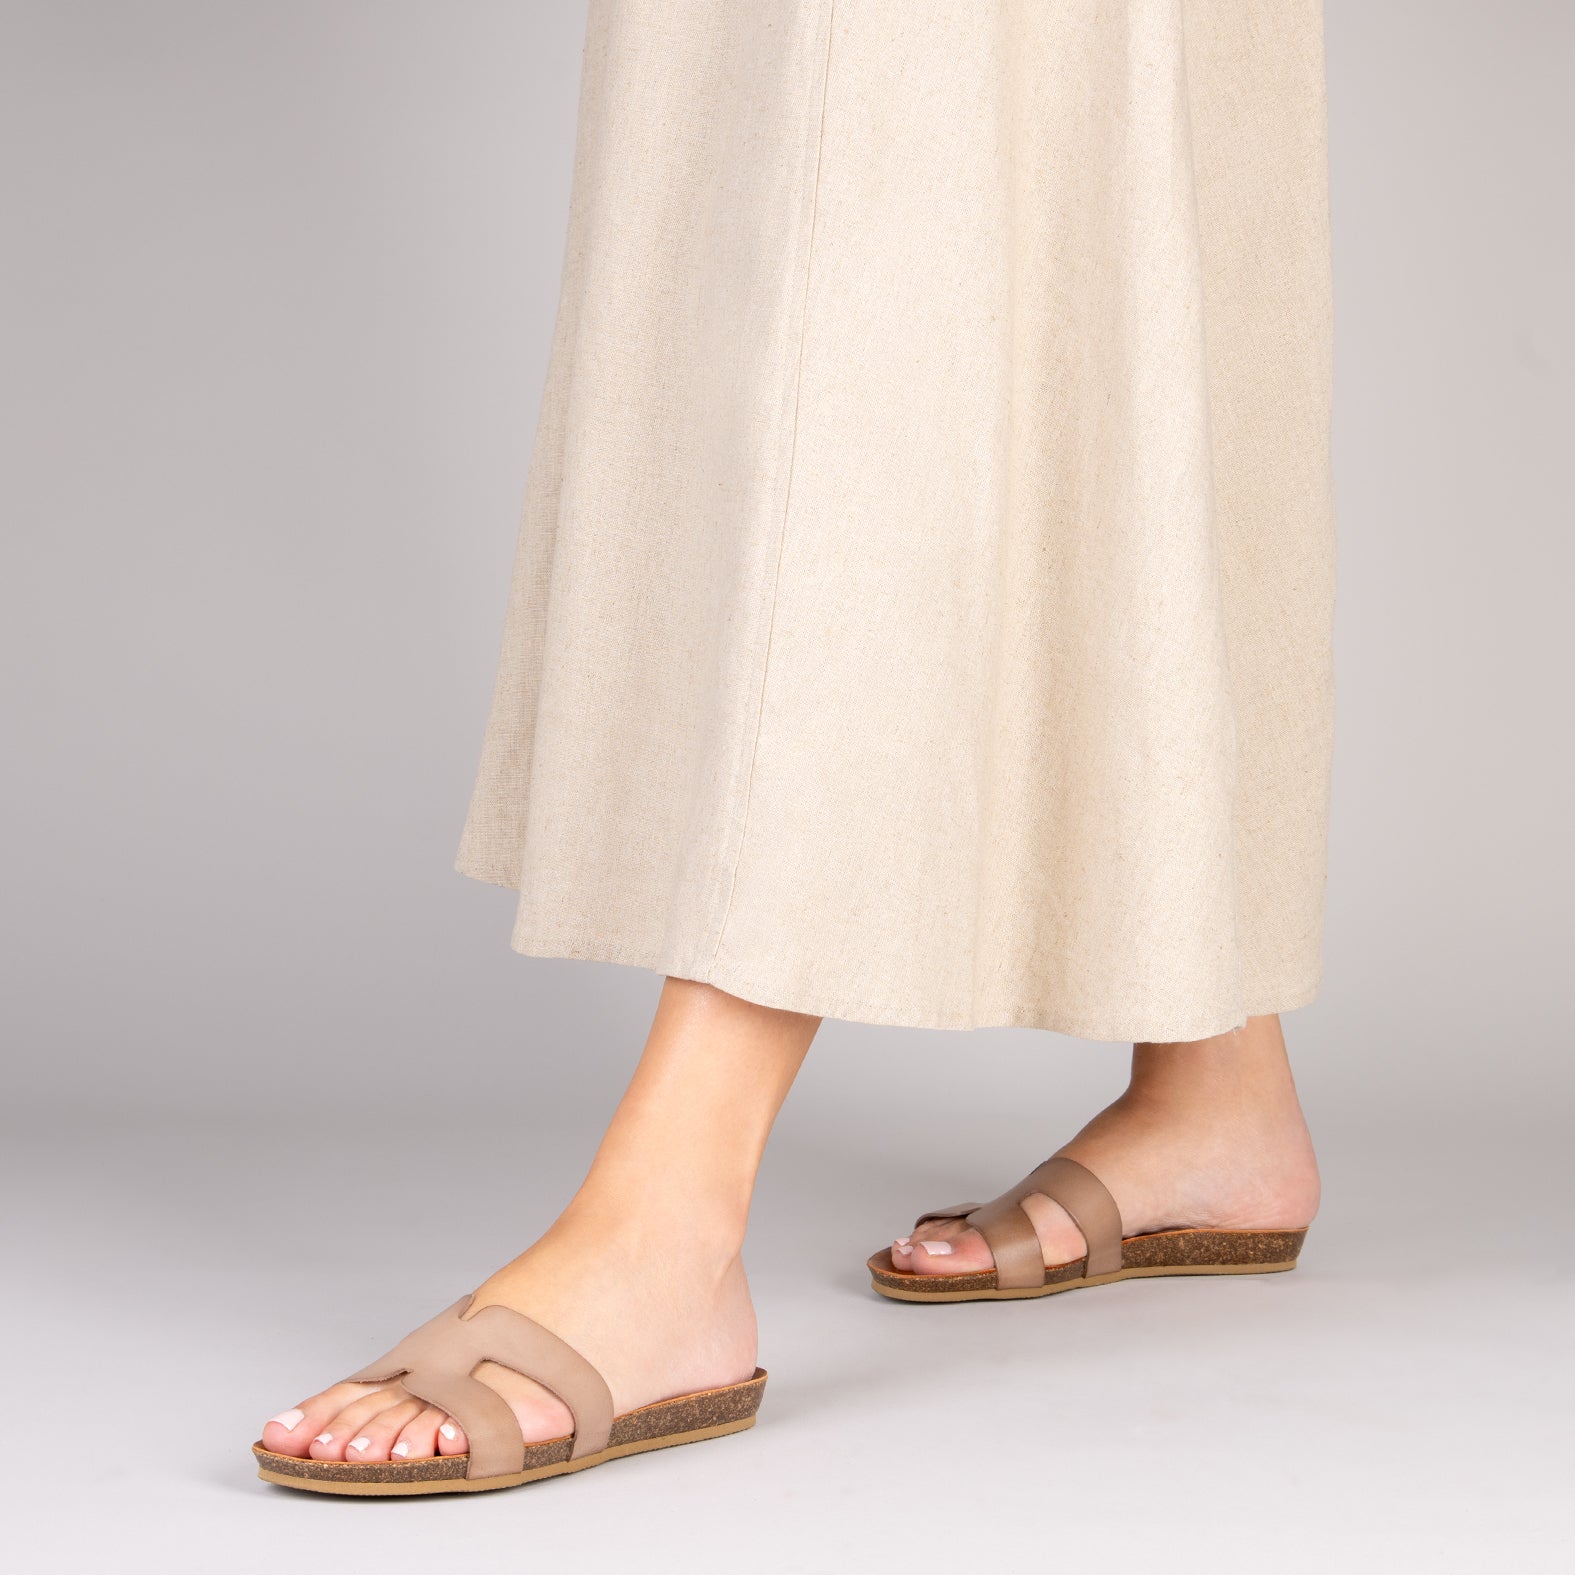 CLIVIA - TAUPE Flat Sandals